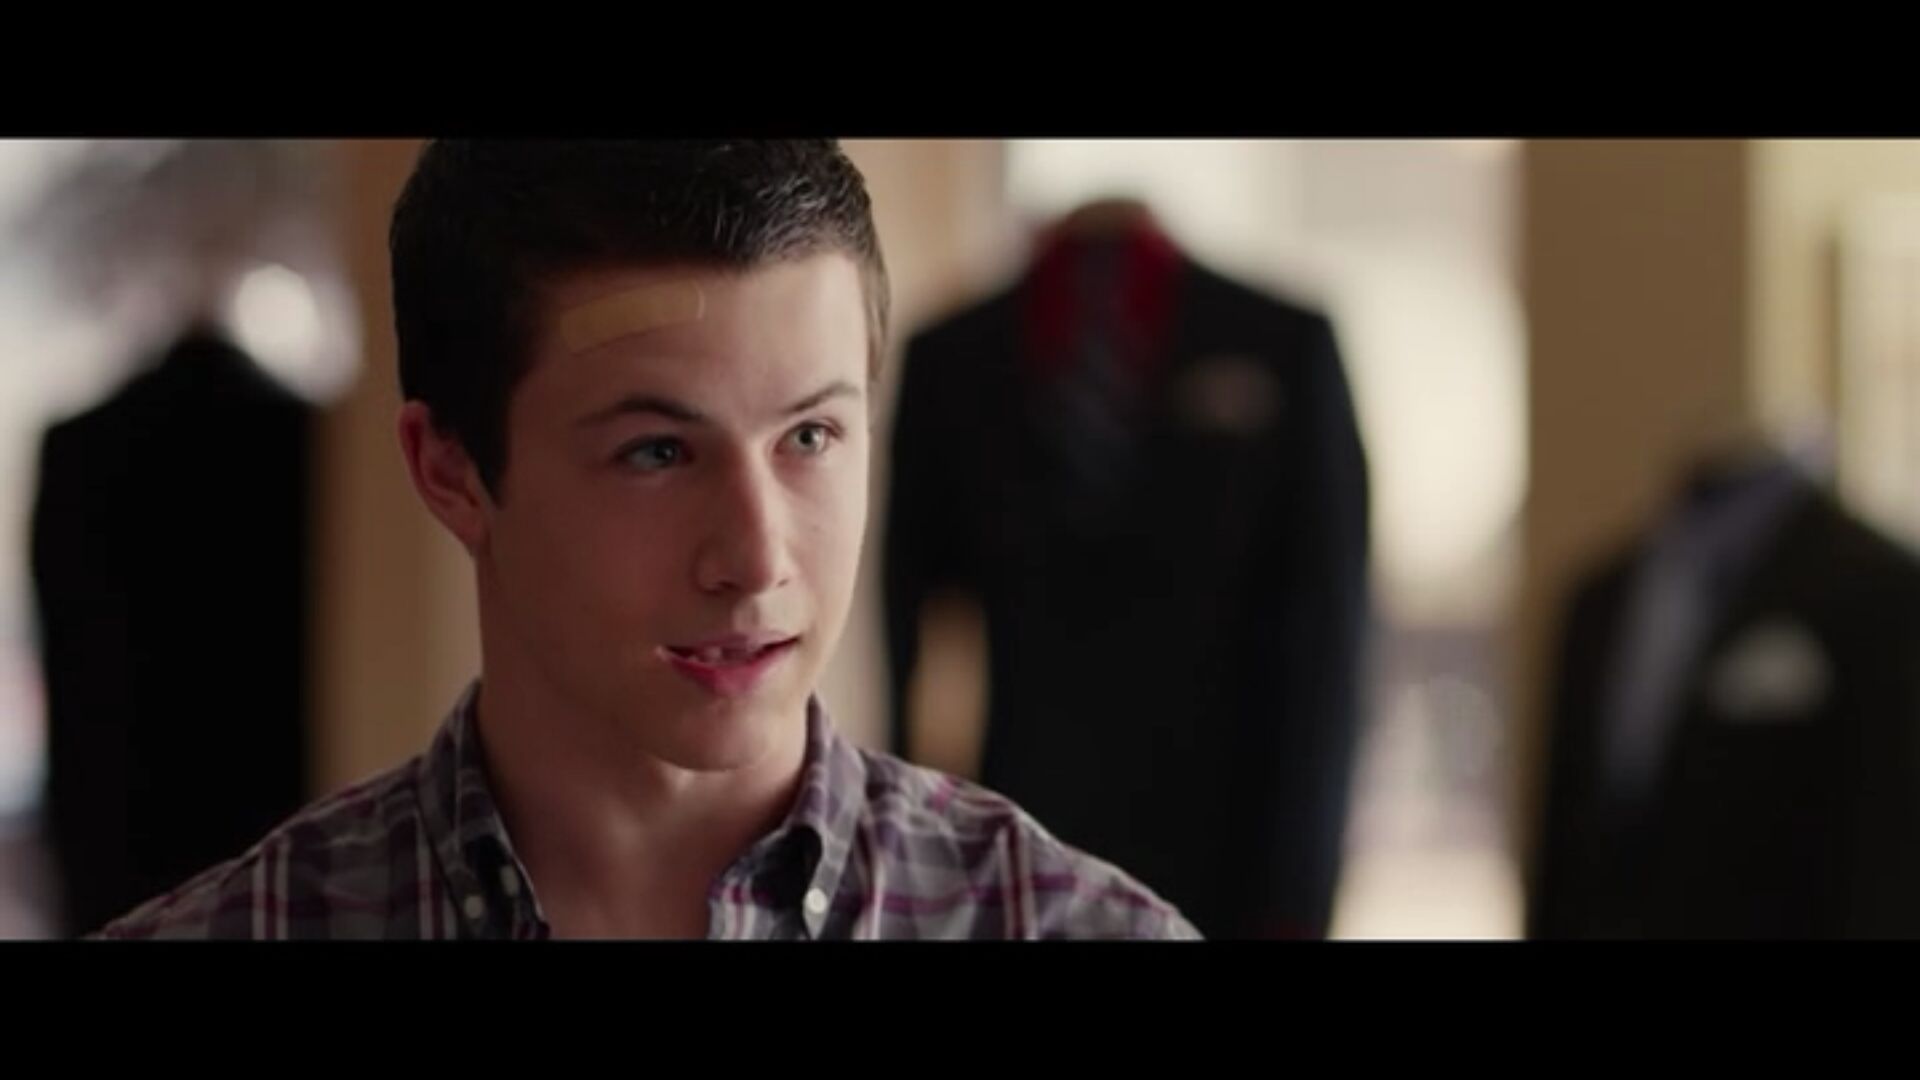 Dylan Minnette's Blue Hair in Alexander and the Terrible, Horrible, No Good, Very Bad Day - wide 10